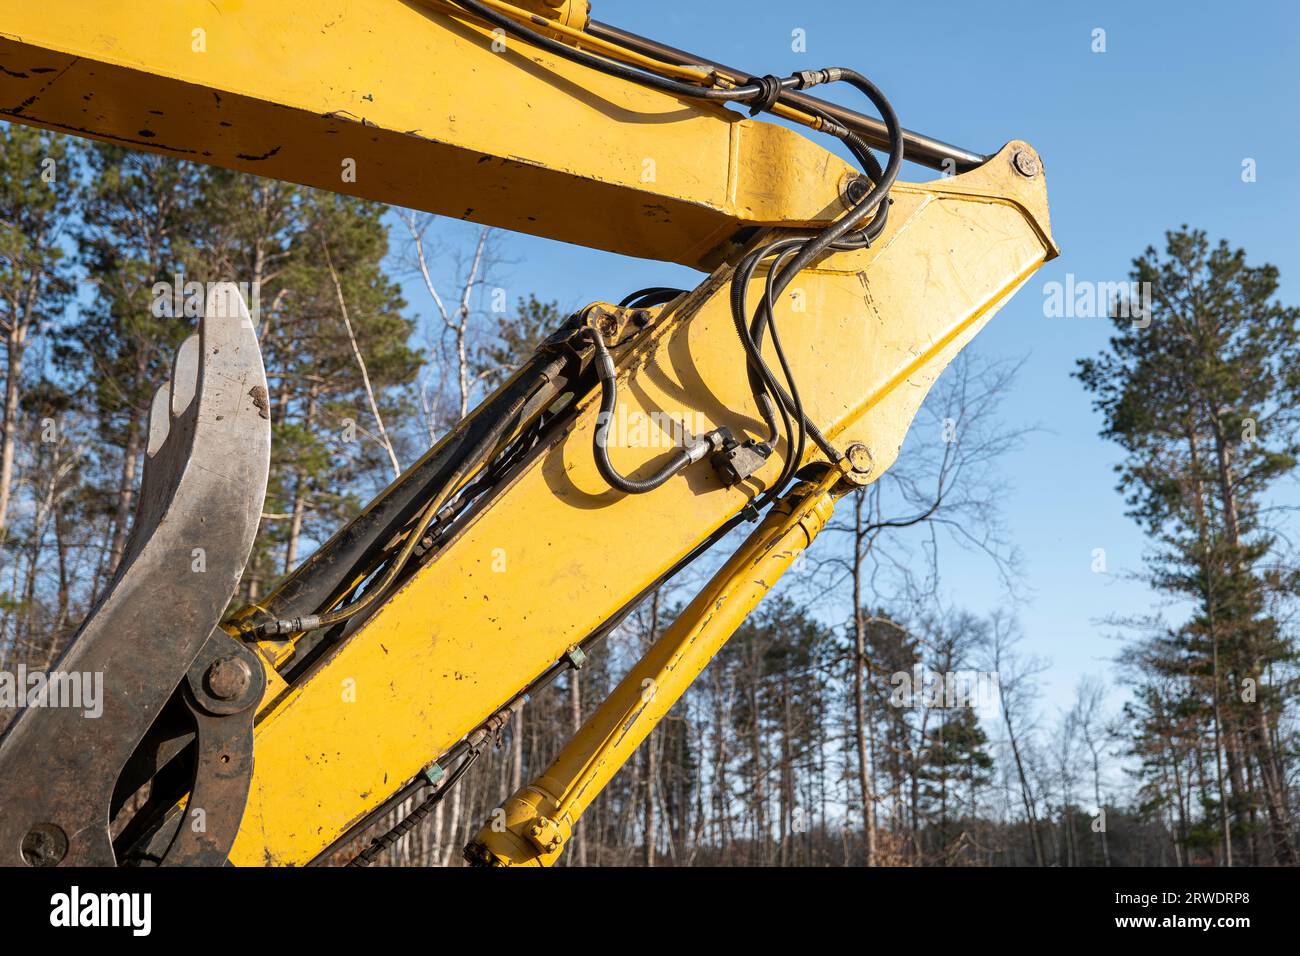 The boom arm elbow and hydraulics tubing on a working heavy equipment excavator on a new home construction site, with blue sky and trees in the backgr Stock Photo